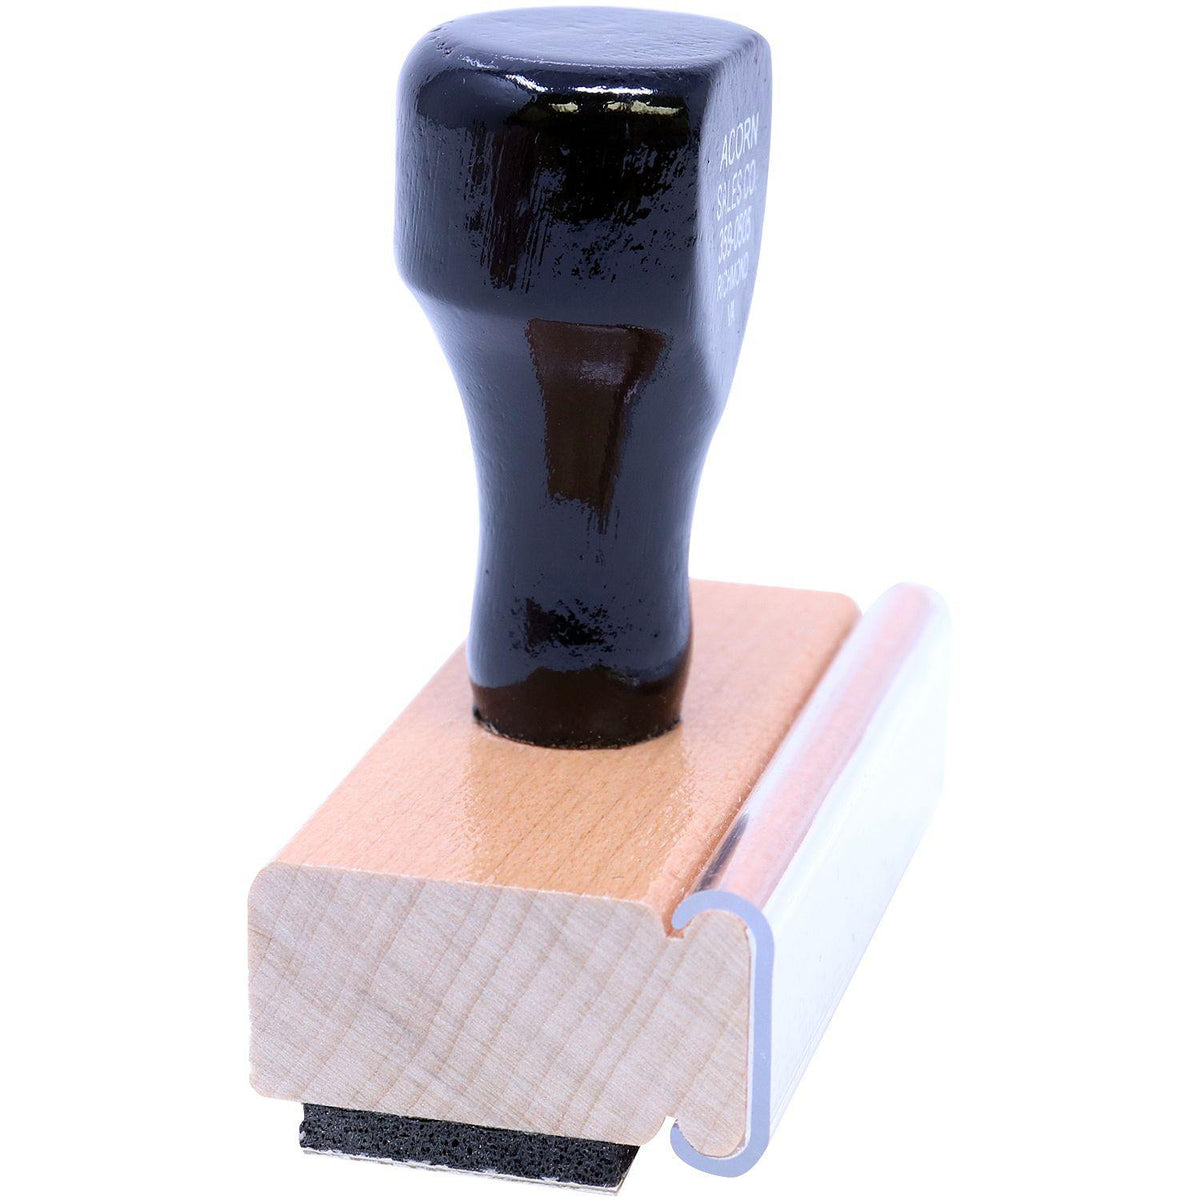 Side View of Large Bold Covid-19 Rubber Stamp at an Angle